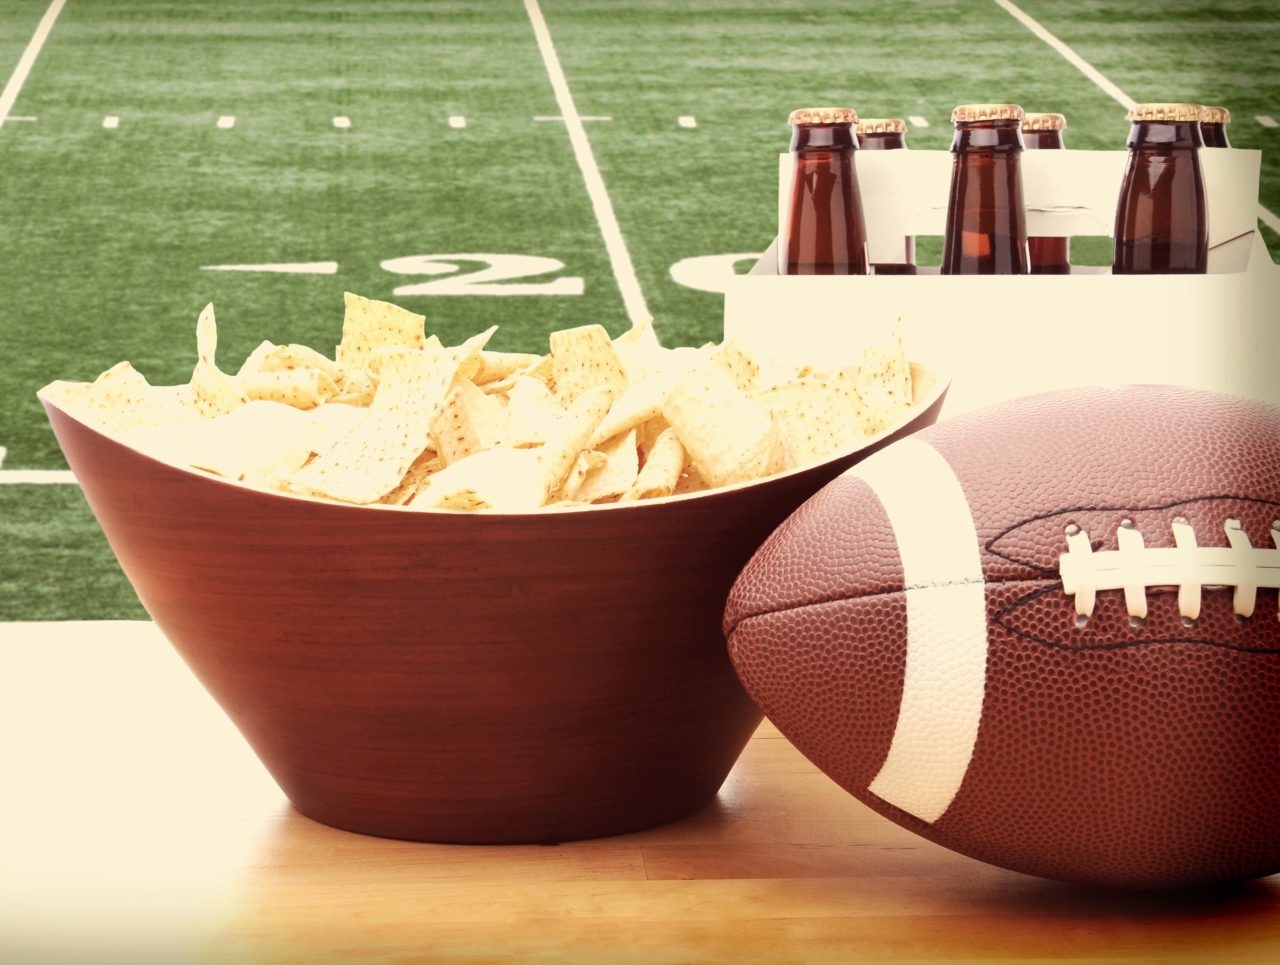 Chips, football and Six Pack of Beer on a table in front of a big screen TV with a Football field. Great for Super Bowl themed projects. Horizontal format with instagram effect applied.